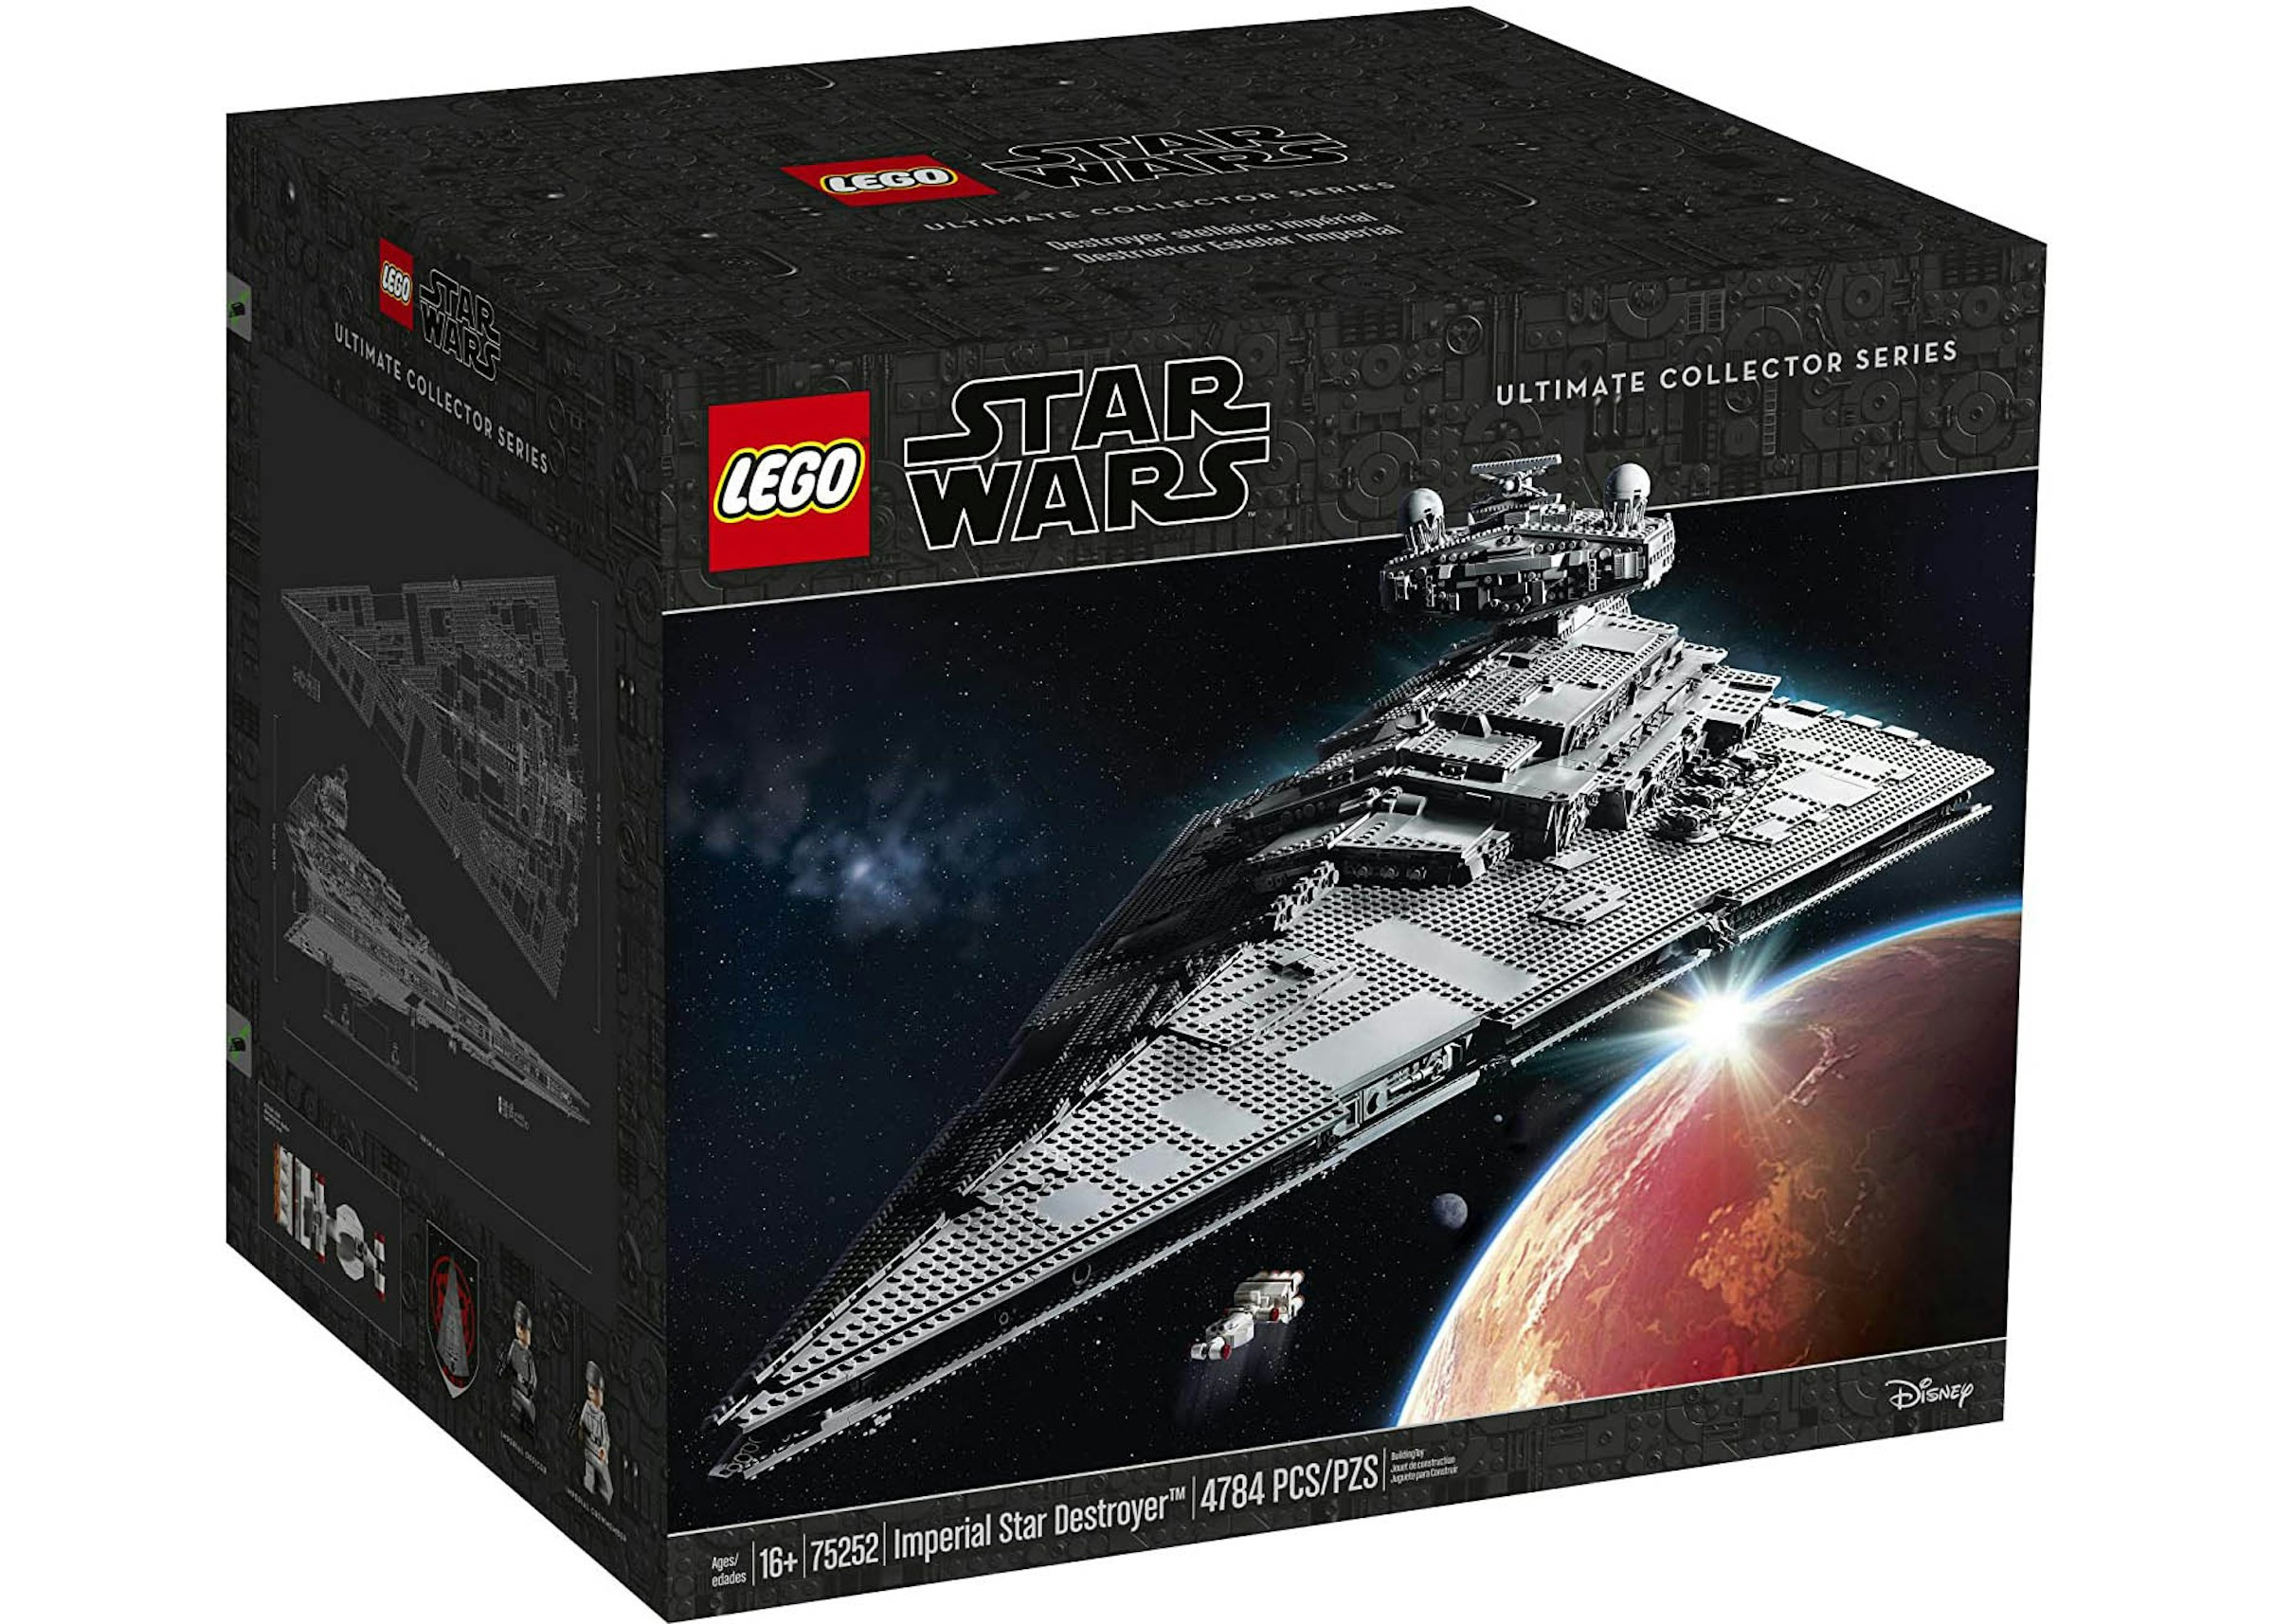 Star Wars Imperial Star Destroyer Ultimate Collector Series 75252 - US